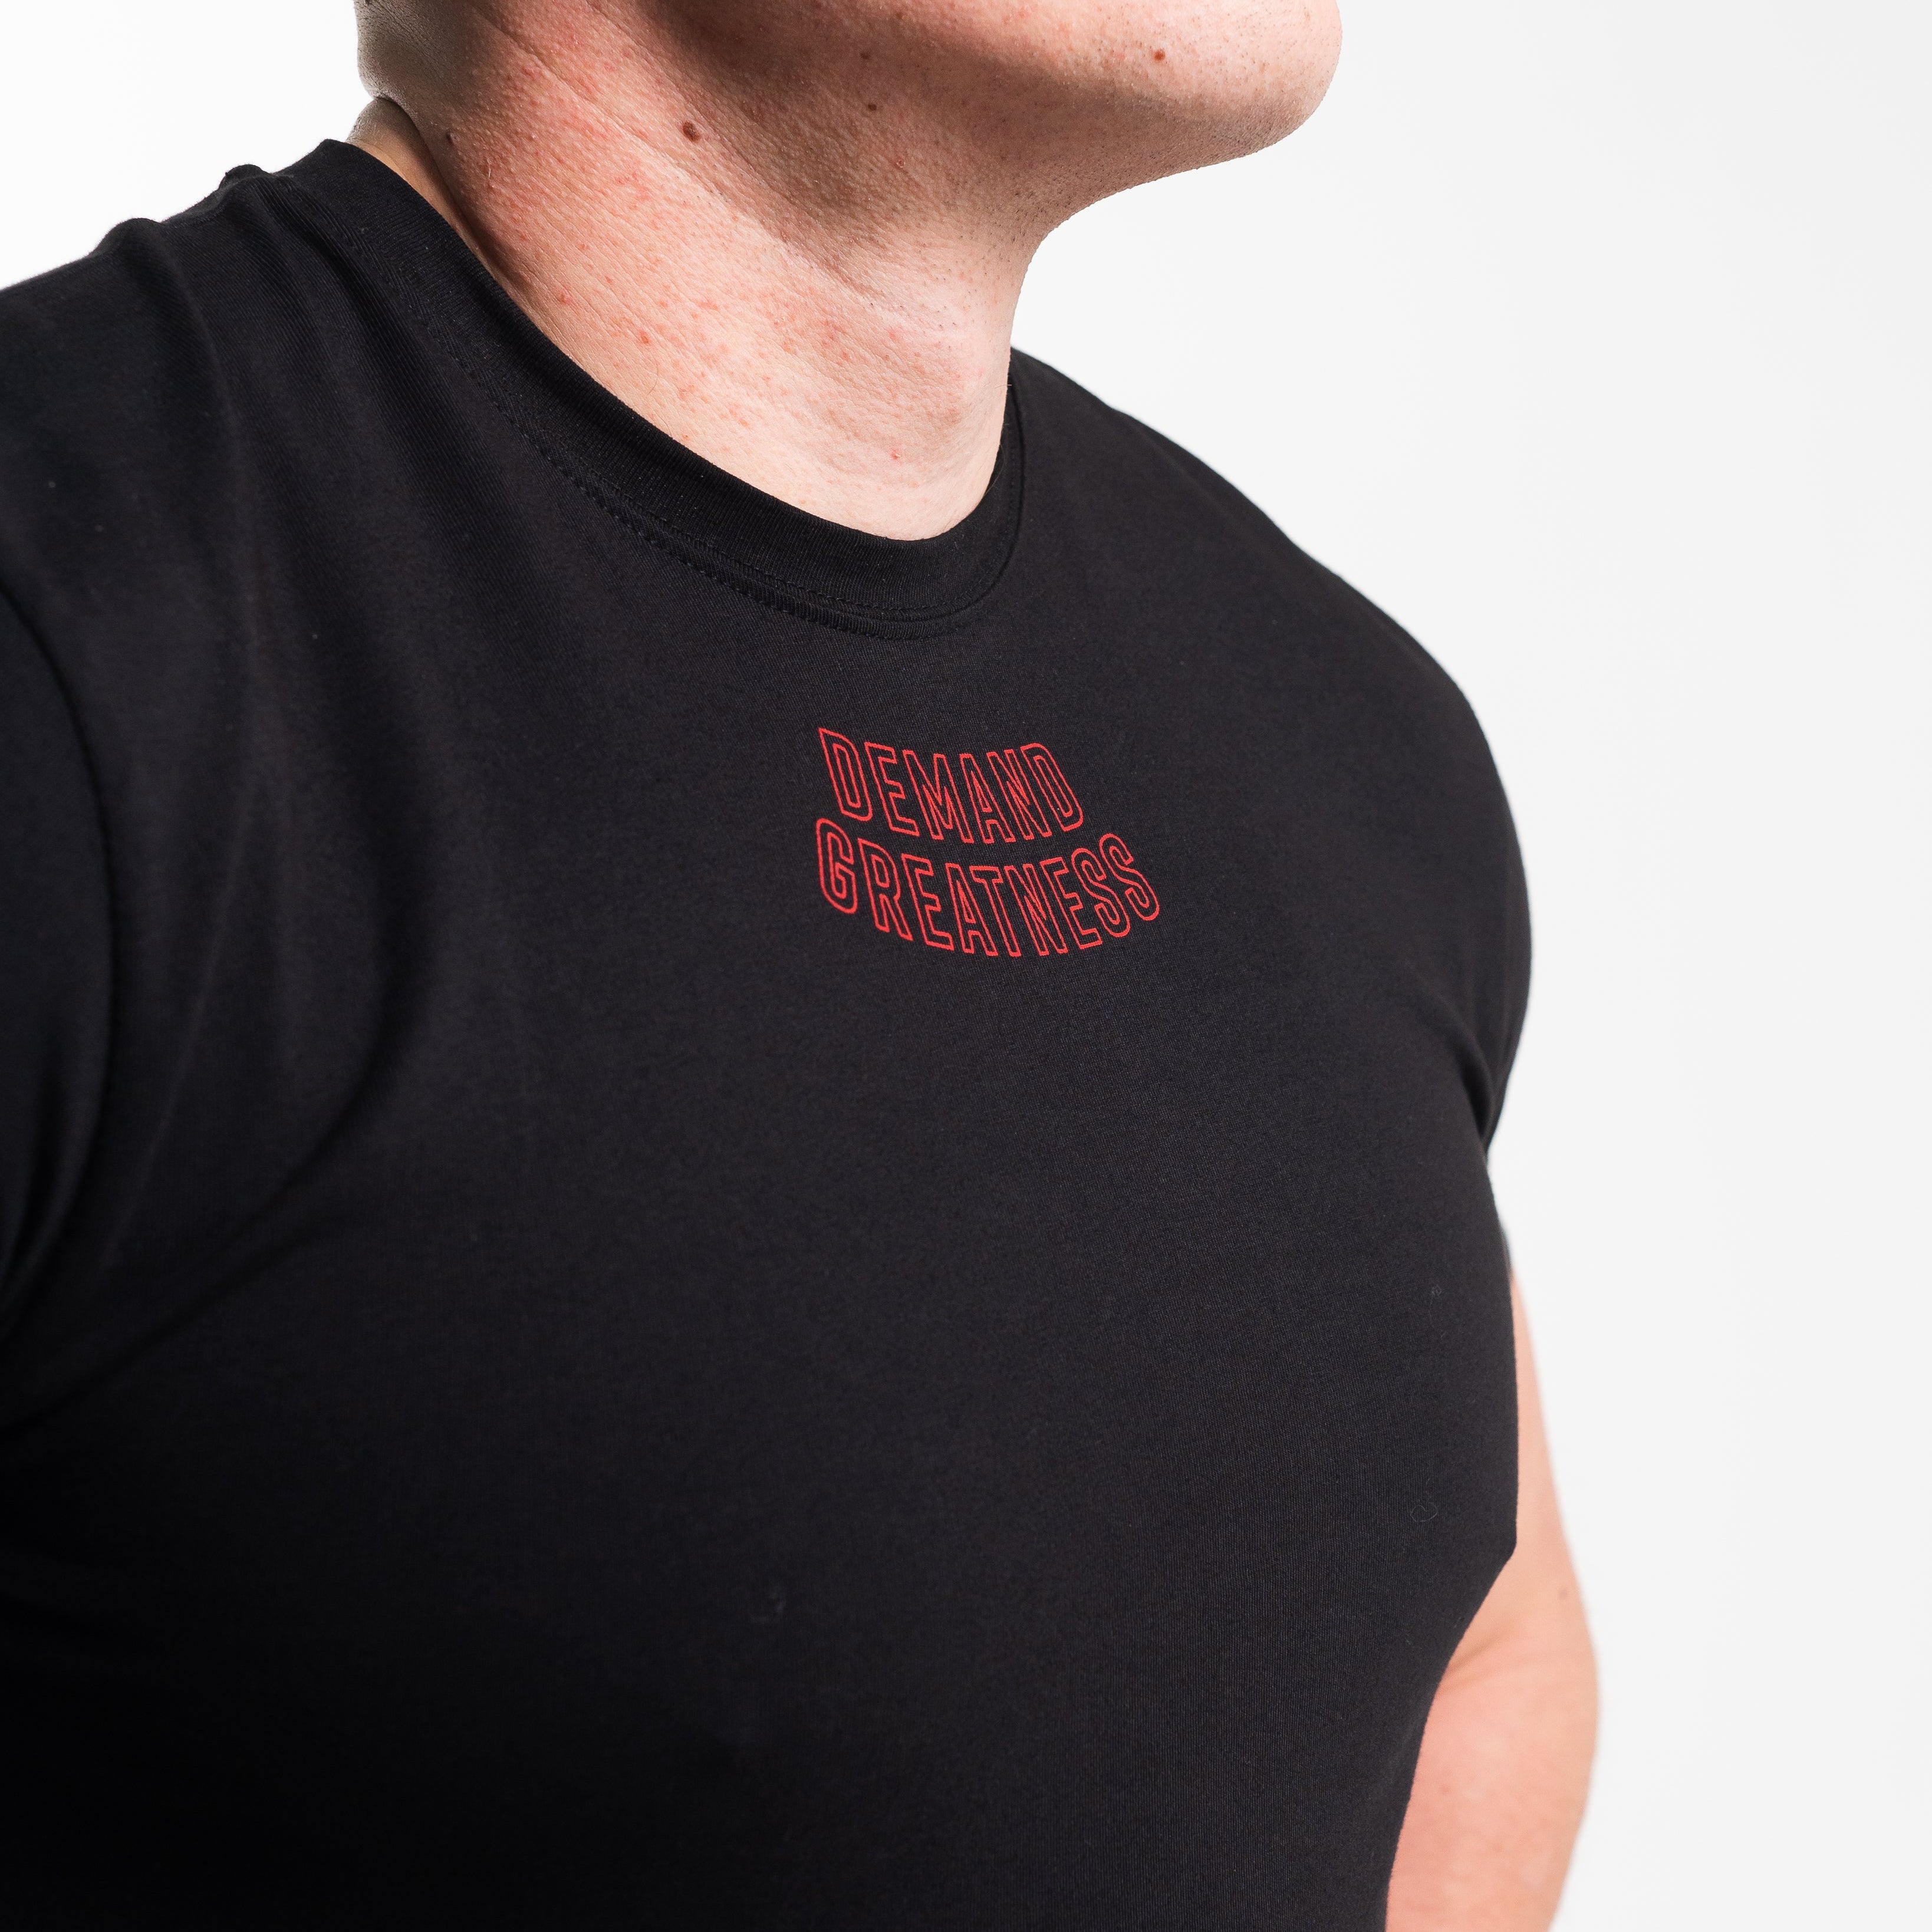 DG23 IPF Approved Meet Shirt Red Dawn is our new meet shirt highlighting Demand Greatness with a double outline font to showcase your impact on the platform. Shop the full A7 Powerlifting IPF Approved Equipment collection including Powerlifting Singlet, A7 Meet Shirt, A7 Zebra Wrist Wraps, A7 Deadlift Socks, Hourglass Knee Sleeves (Stiff Knee Sleeves and Rigor Mortis Knee Sleeves). PAL Lever is now IPF Approved. Genouillères powerlifting shipping to France, Spain, Ireland, Germany, Italy, Sweden and EU. 